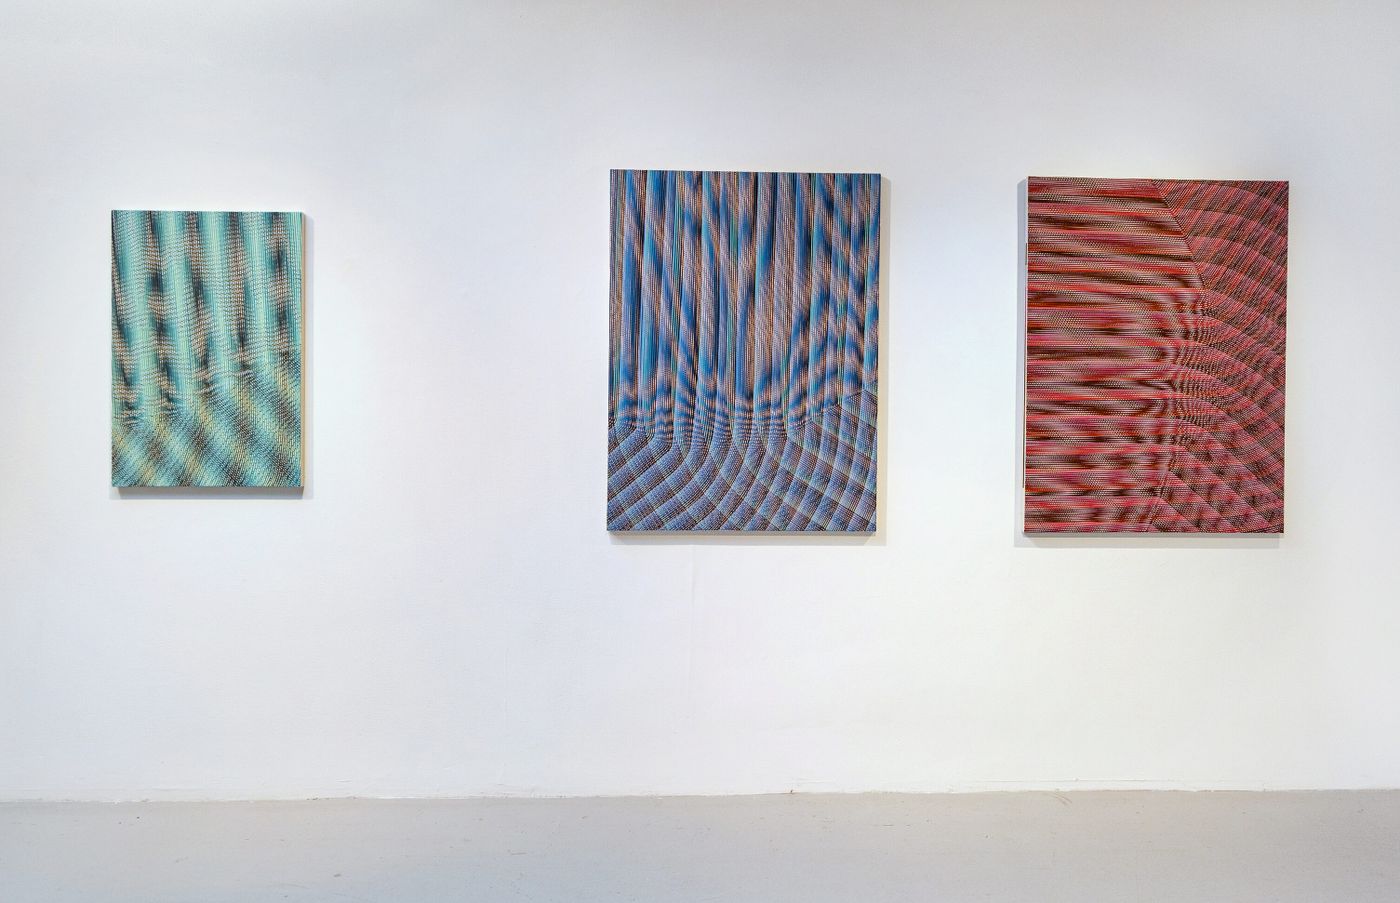 left to right: Shadow Integration, Breath Play, Hollow Point, 2021-22. Flashe vinyl acrylic on canvas; 24 x 1.5 x 36 in., 36 x 1.5 x 48 in., 36 x 1.5 x 48 in. Photo: Meghan Olson.